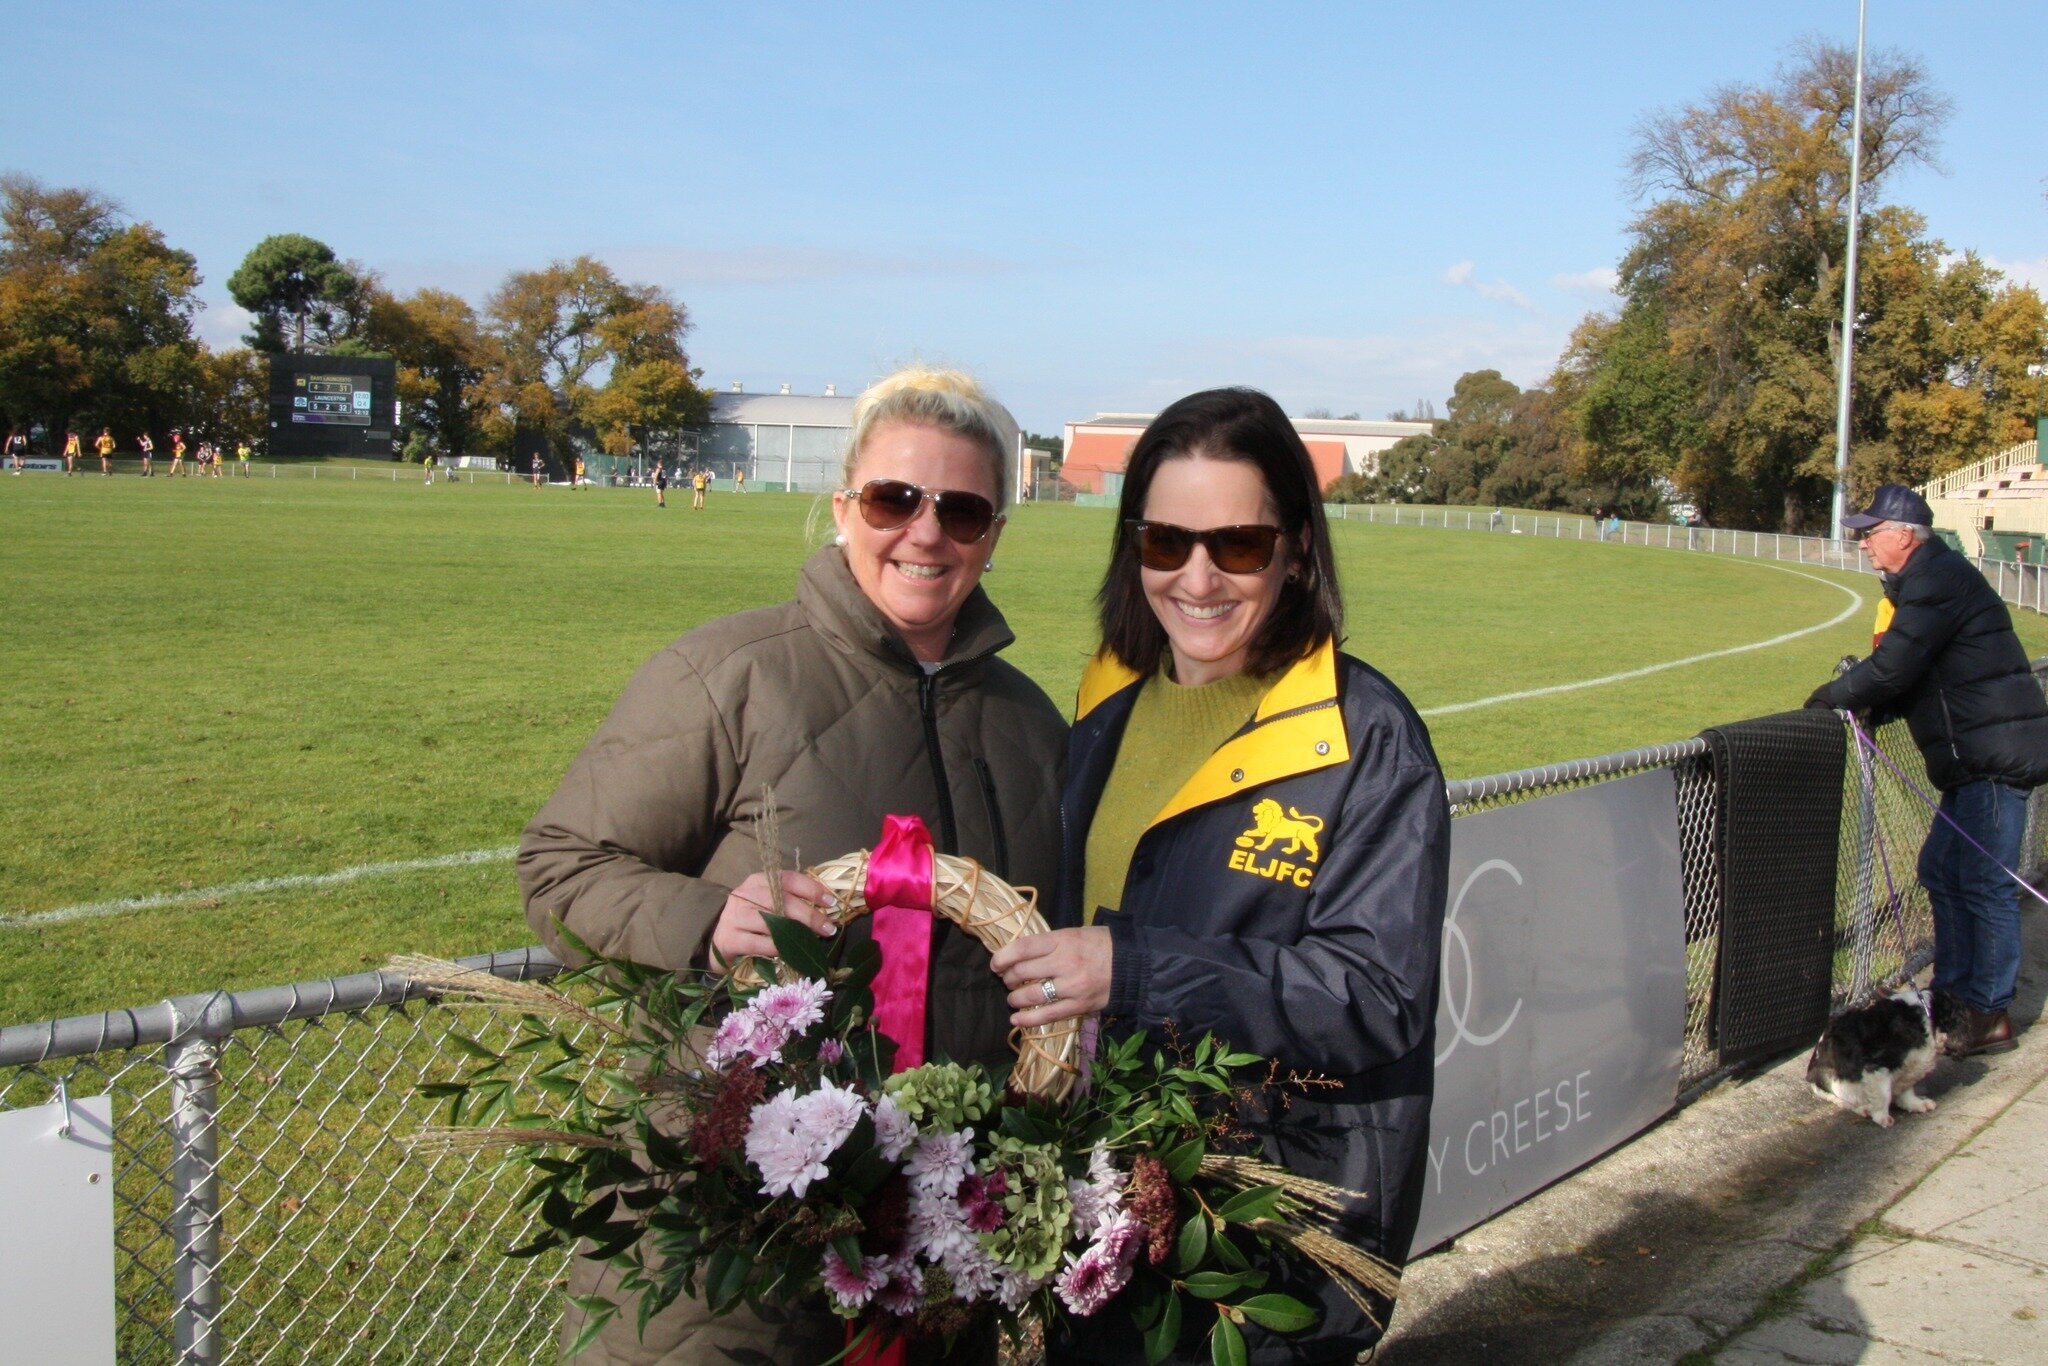 What a great day yesterday both on and off the field it was with Pride that we were able to celebrate all the wonderful mum's at East Launceston Junior Football Club by holding a Mothers Day Raffle. The beautiful wreath hand crafted and donated by an